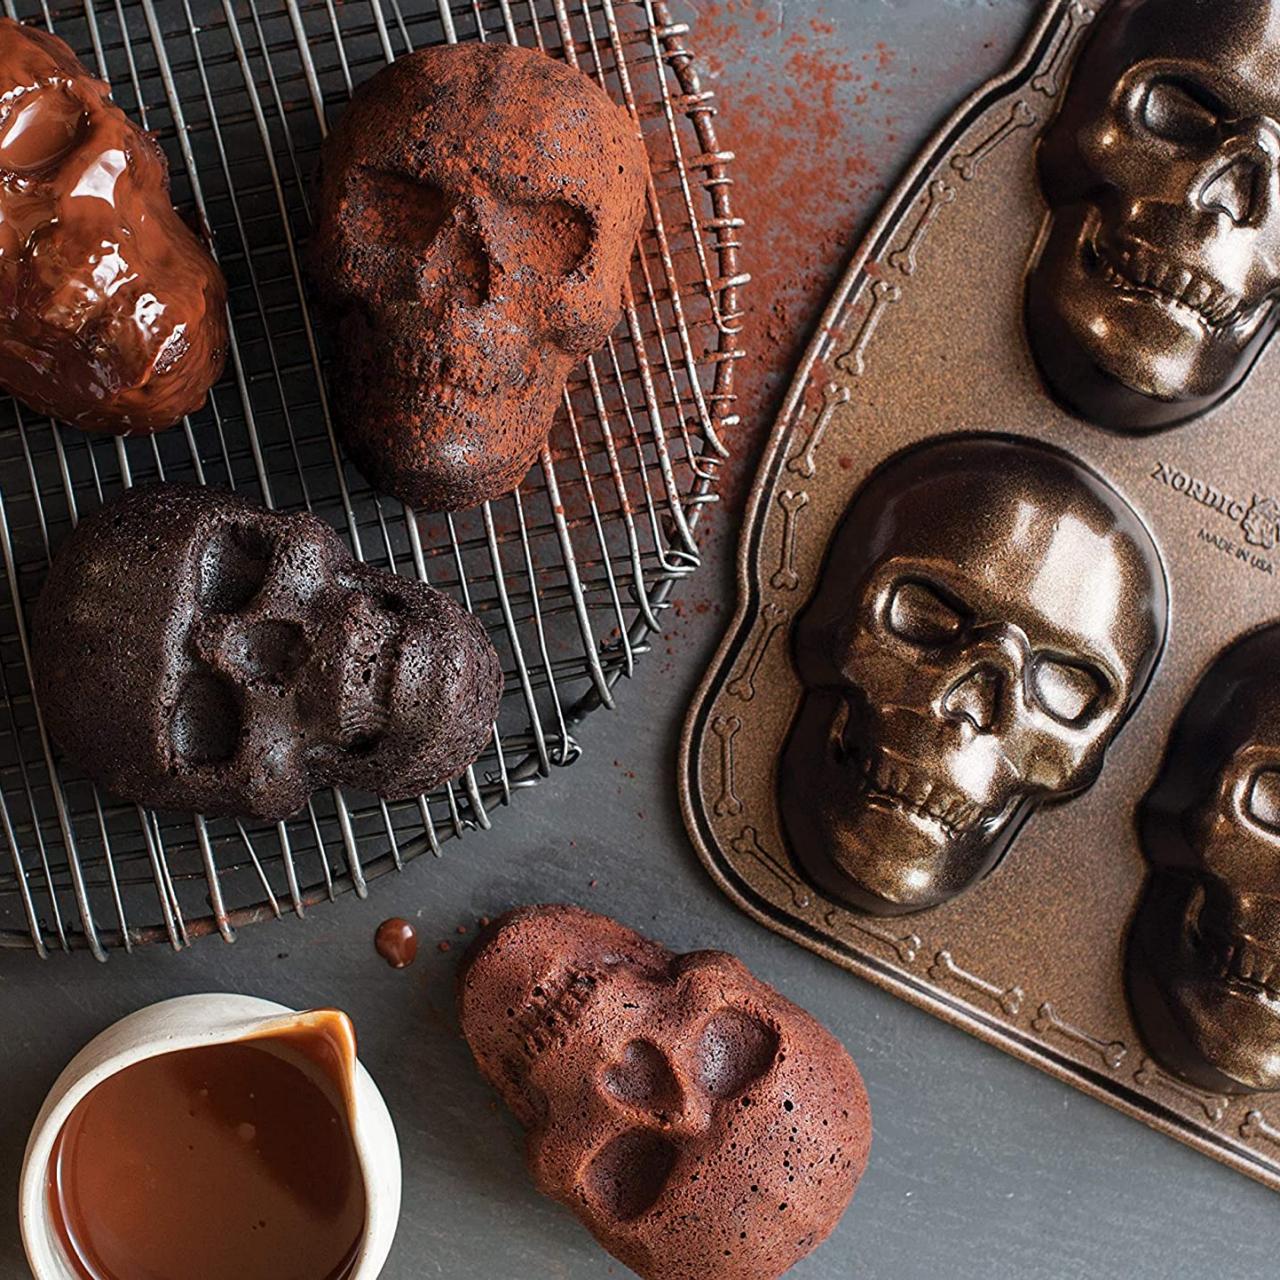 https://food.fnr.sndimg.com/content/dam/images/food/products/2021/10/1/rx_nordic-ware-haunted-skull-cakelet-pan.jpeg.rend.hgtvcom.1280.1280.suffix/1633110335853.jpeg